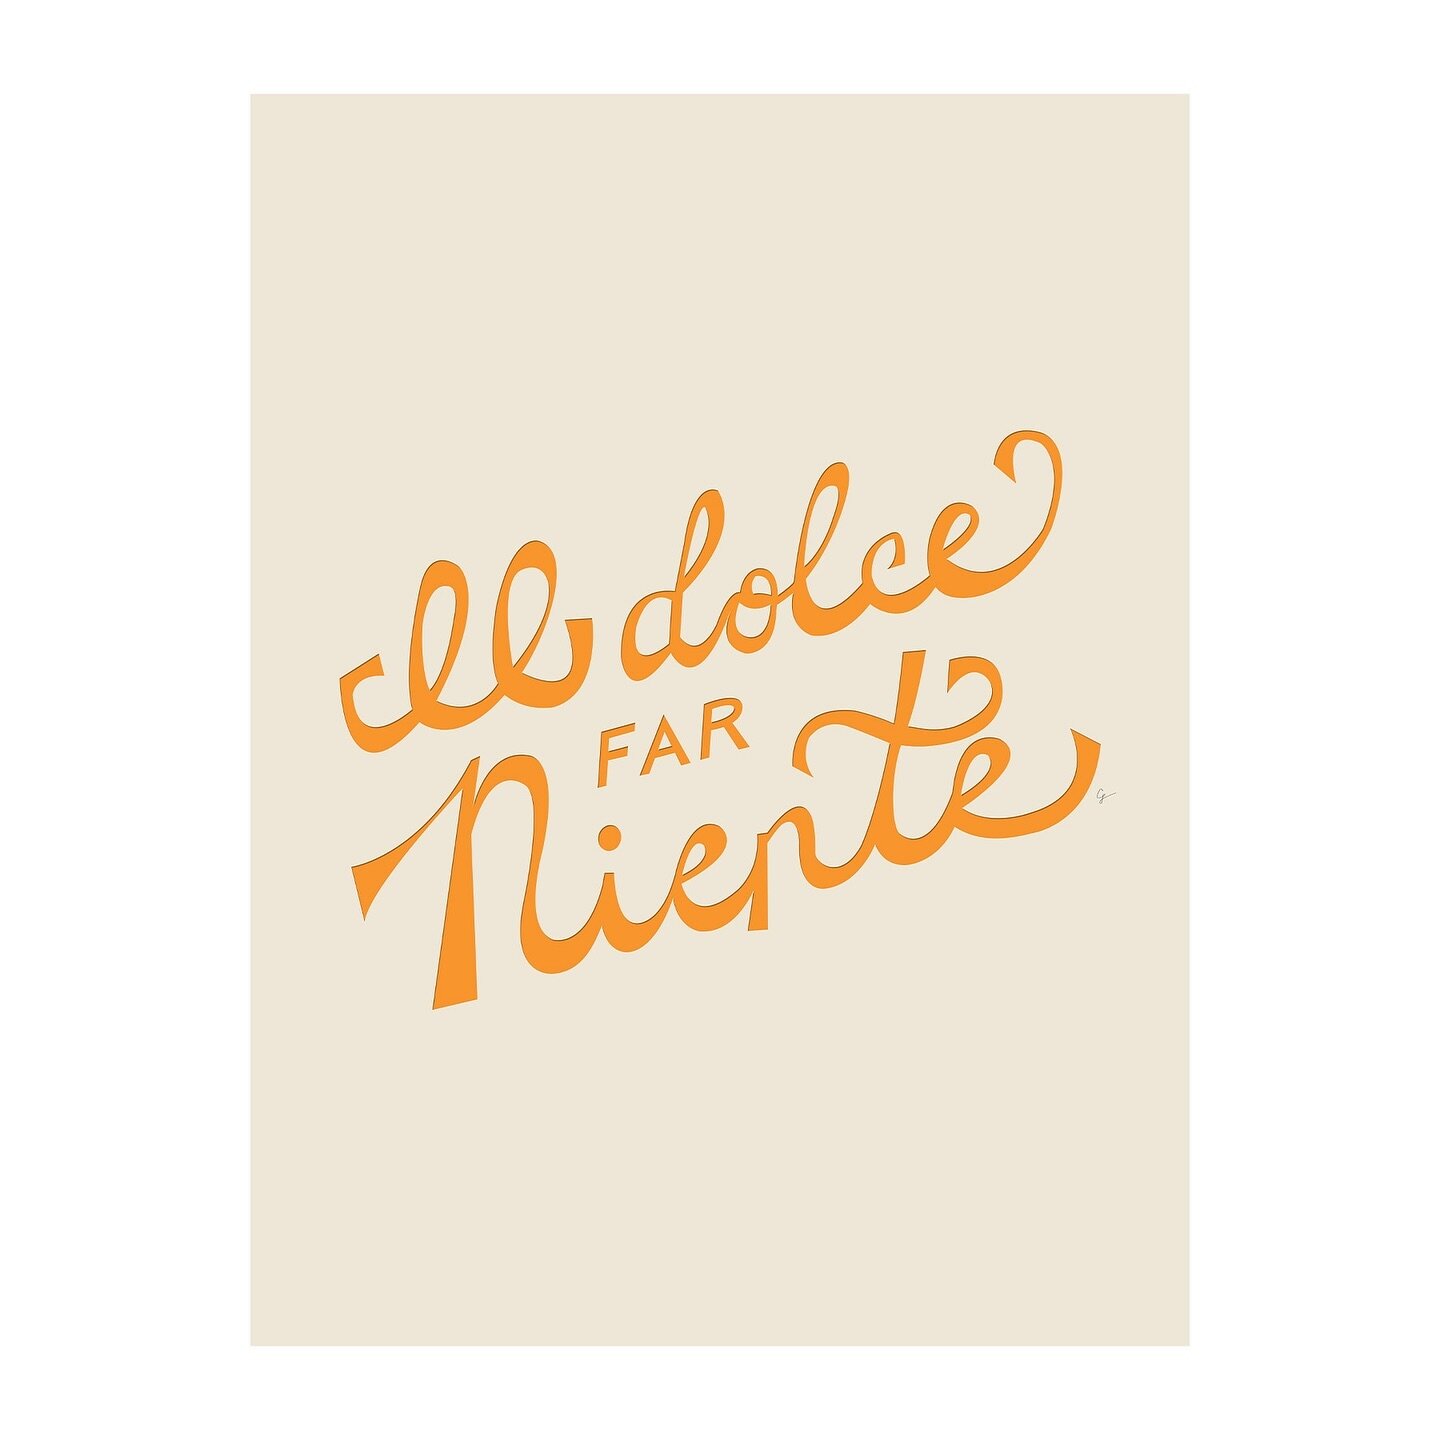 Il dolce far niente [ The sweetness of doing nothing ] 🇮🇹 #italia #italian #handlettered #handlettering #quotes